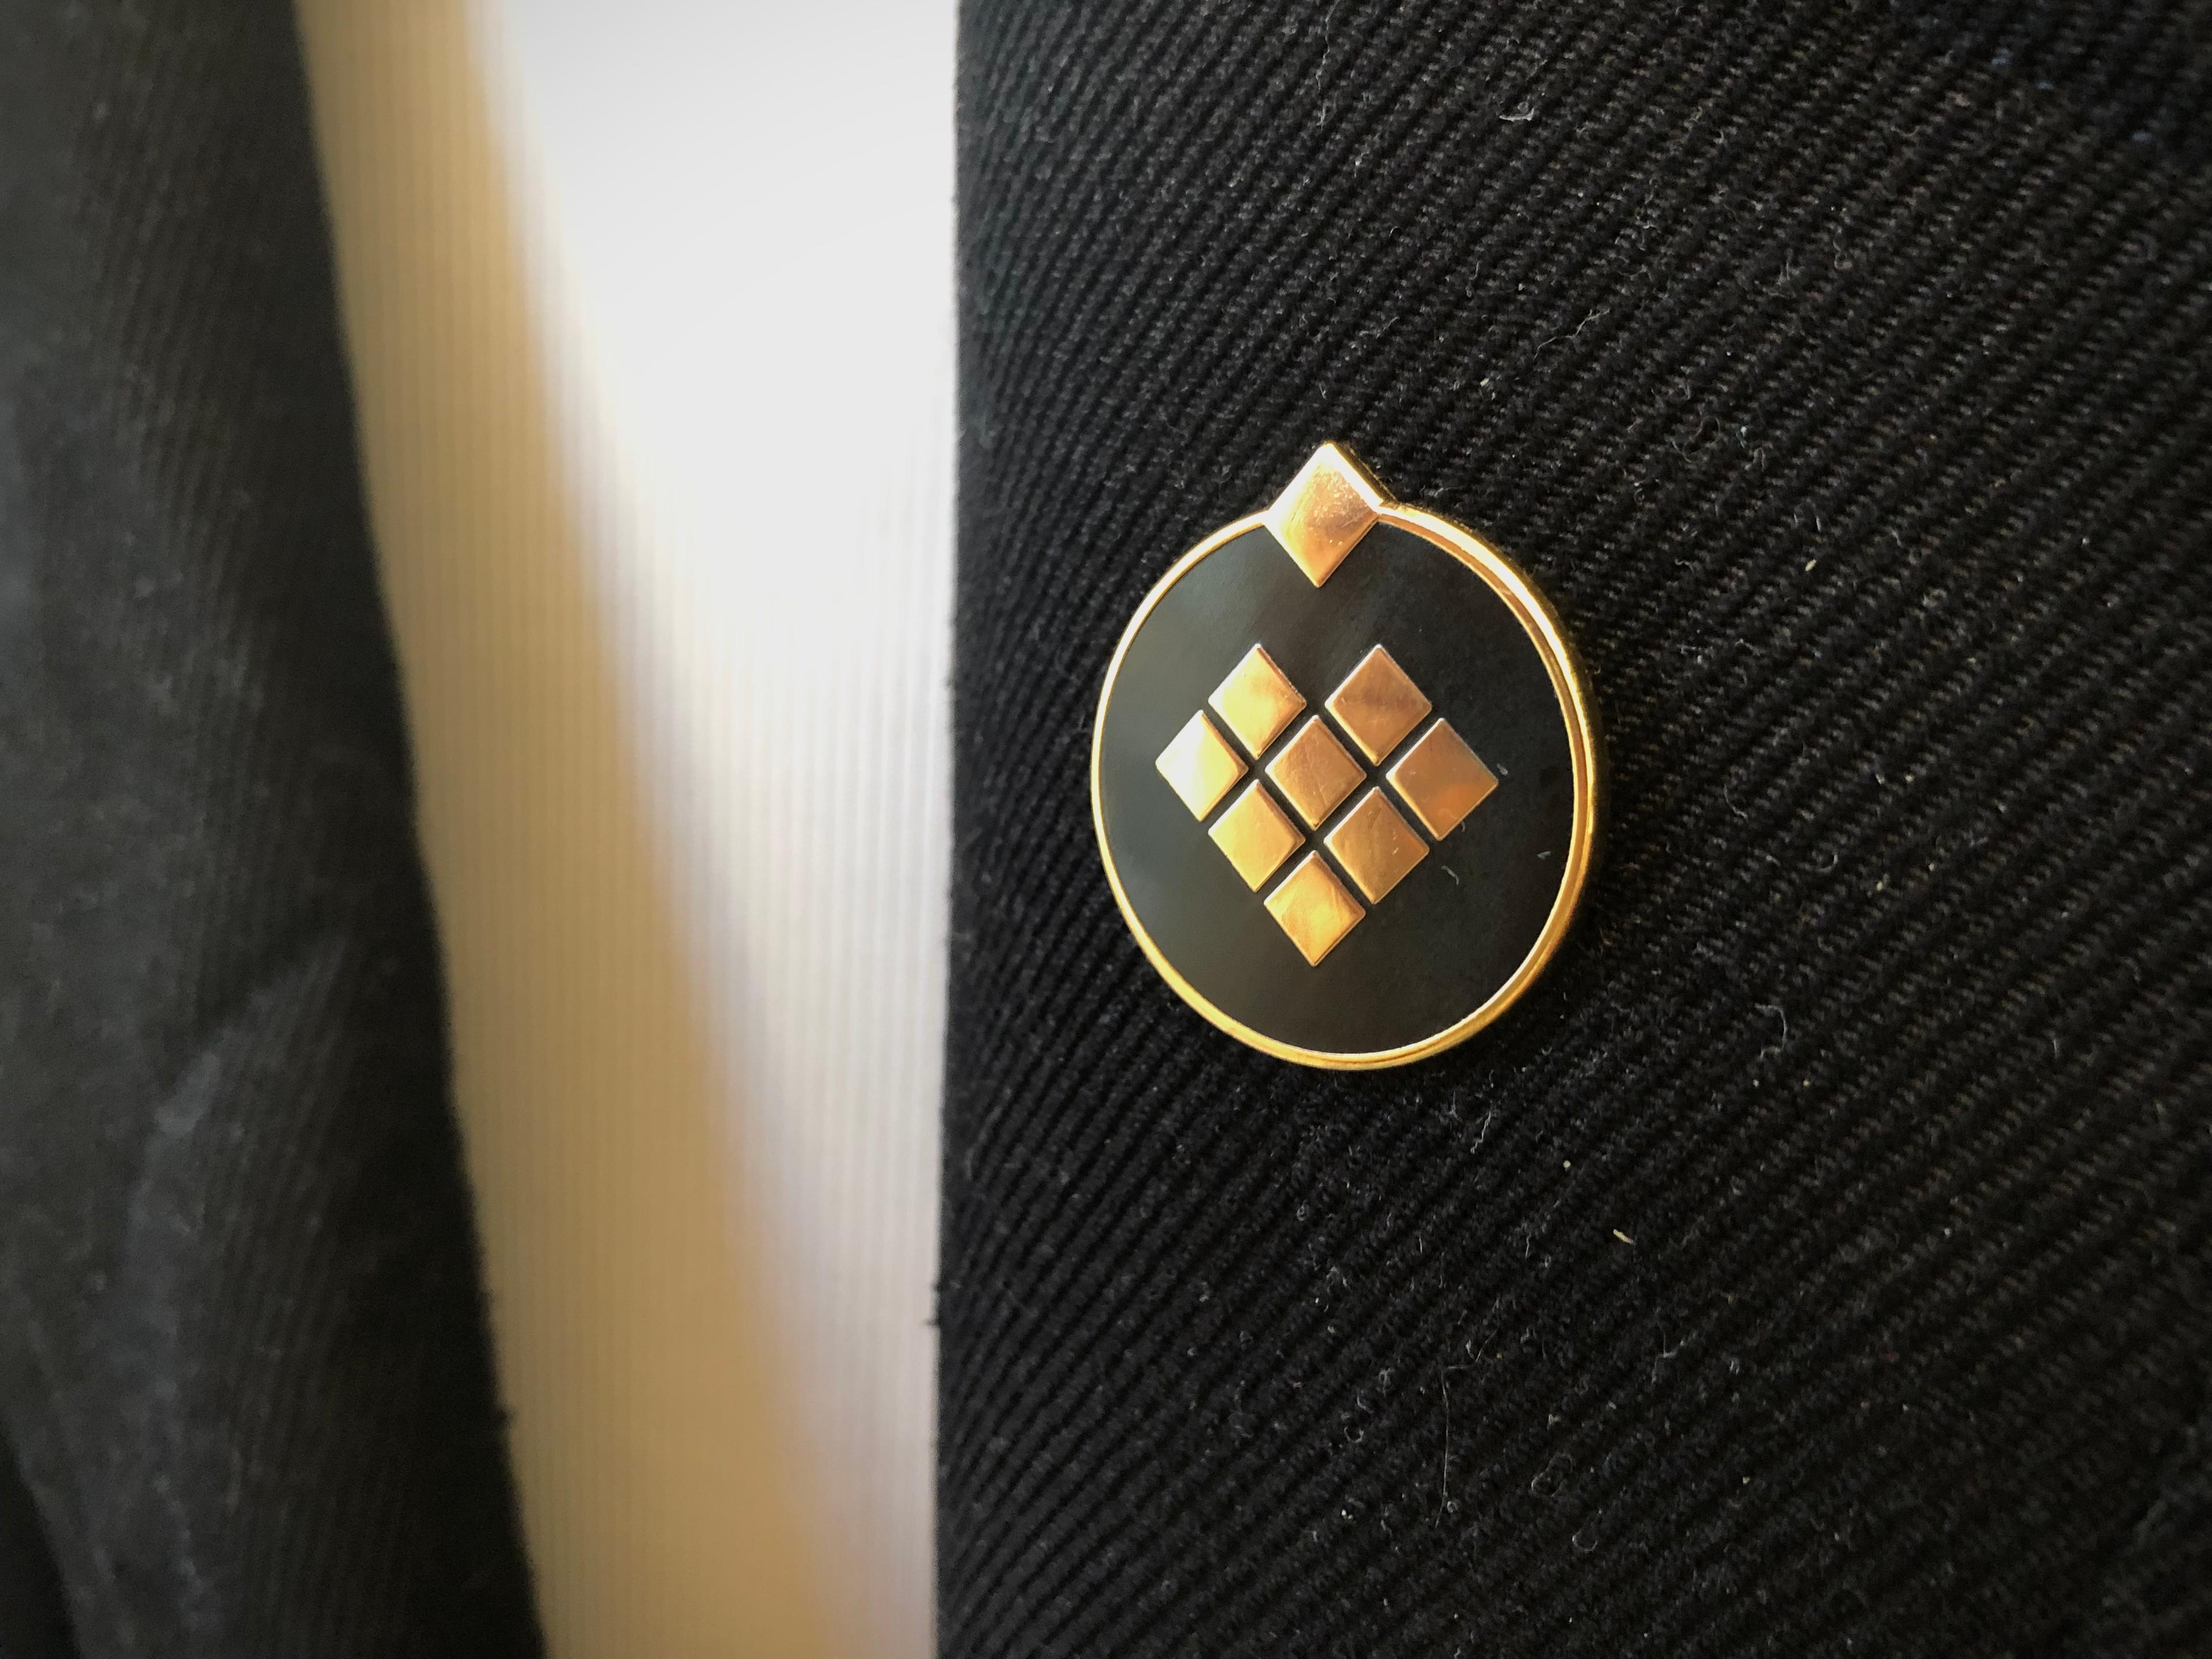 Black and gold enamel pin with the Giving What We Can logo in the centre